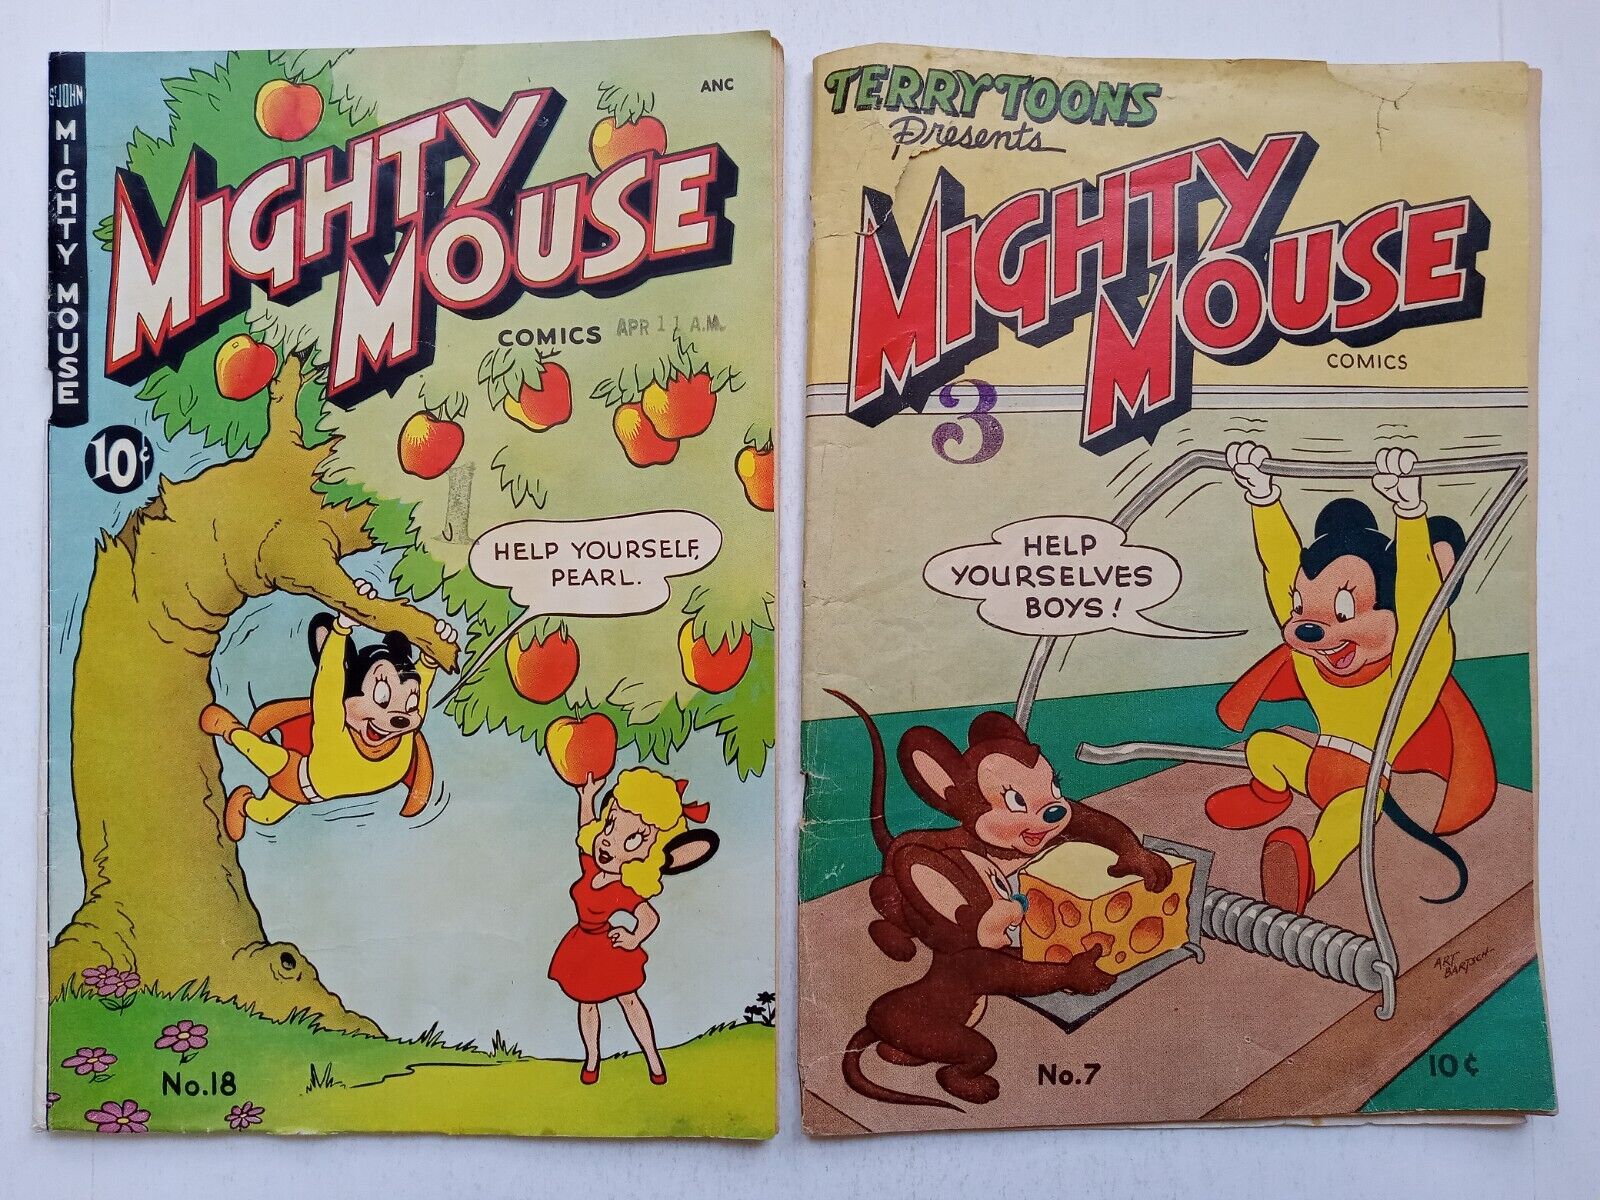 St John Mighty Mouse Comic #7 #18 Golden Age 1948 1950 Lot Paul Terry Terrytoons